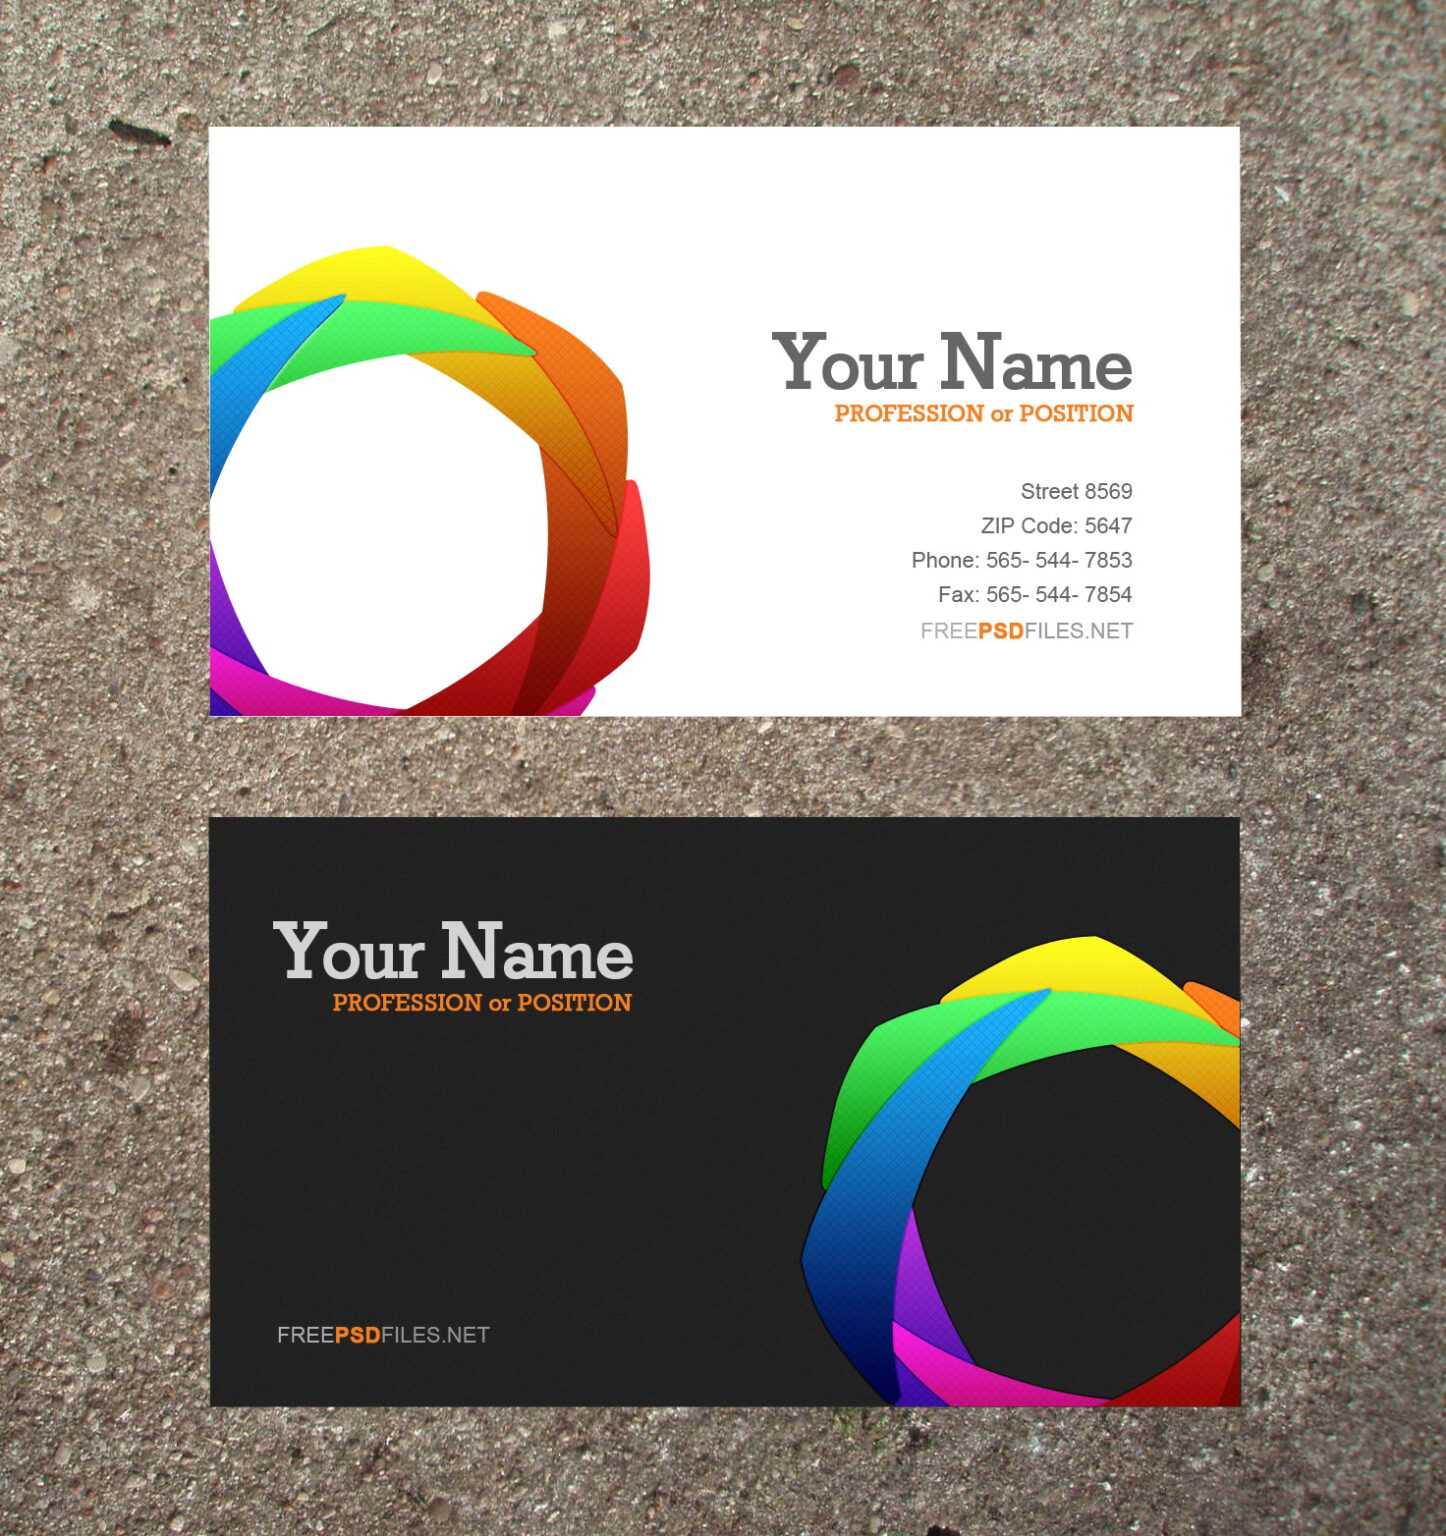 16-business-card-templates-images-free-business-card-in-microsoft-templates-for-business-cards